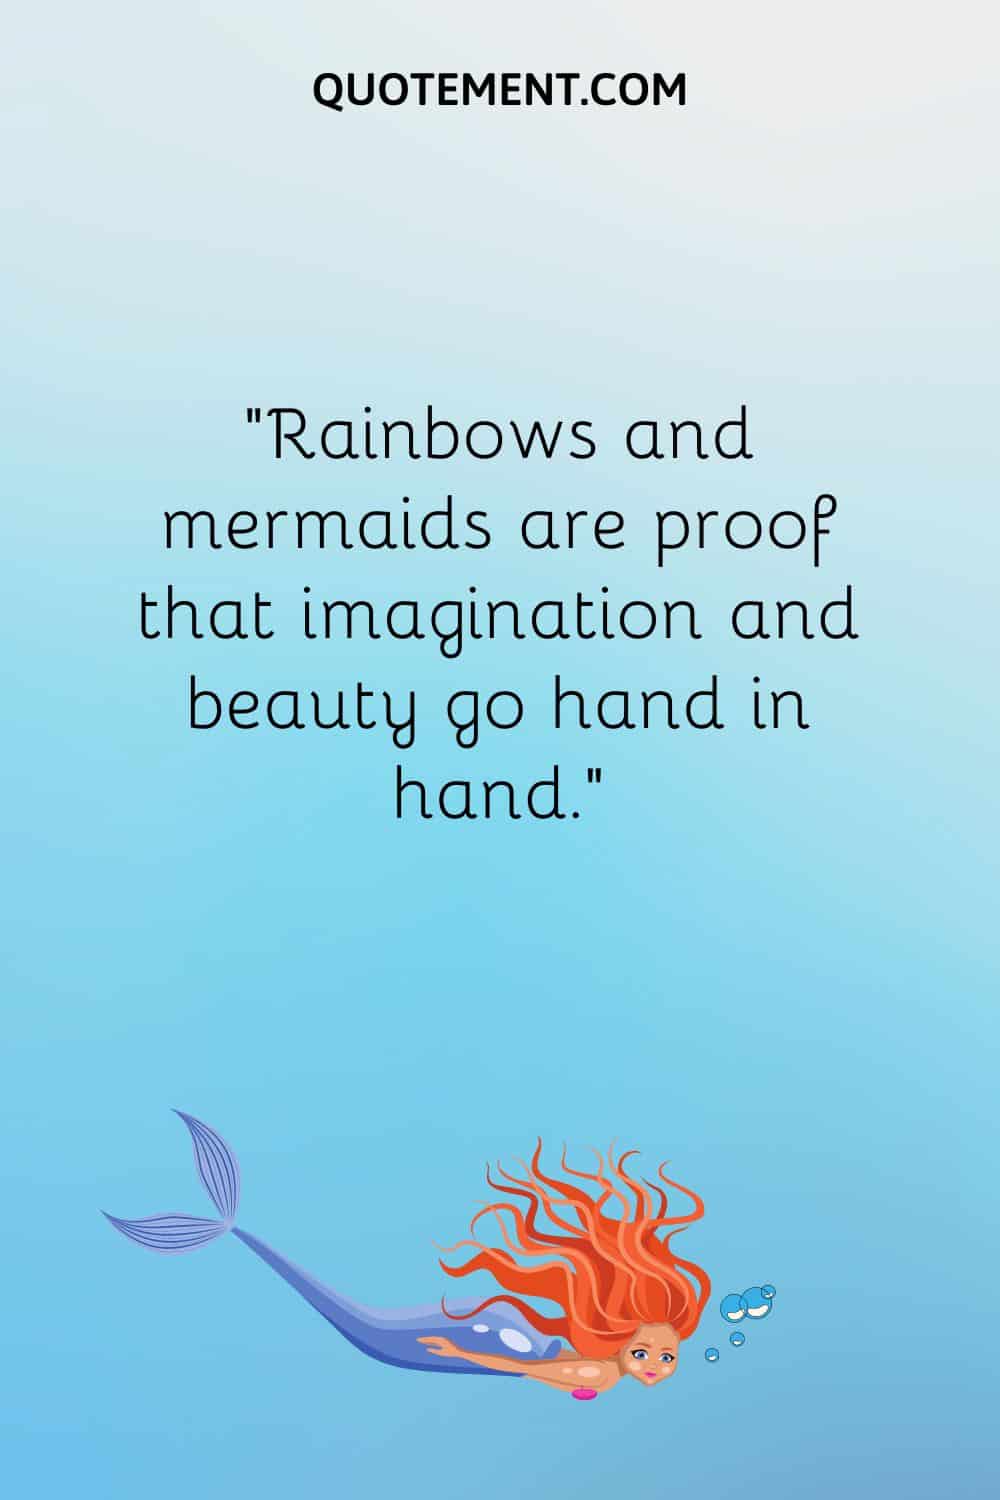 “Rainbows and mermaids are proof that imagination and beauty go hand in hand.”